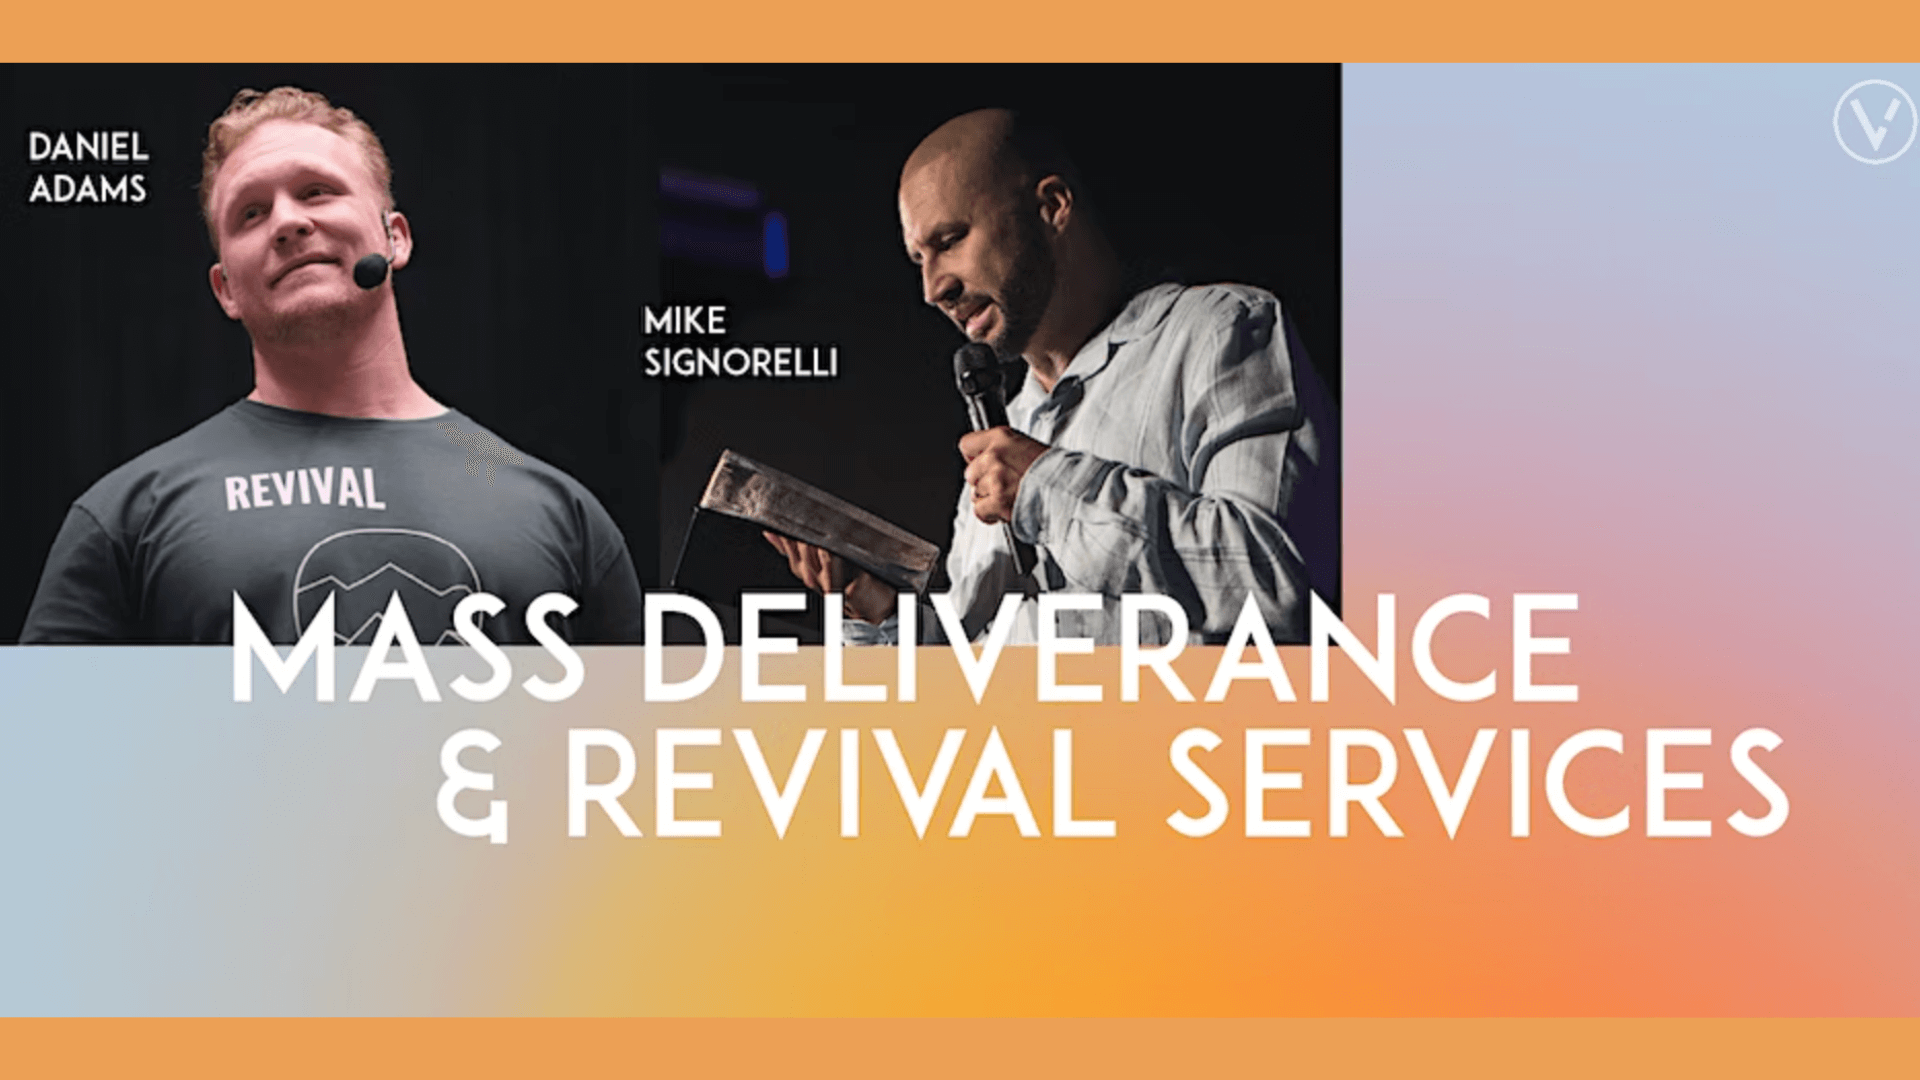 Mass deliverance and revival services